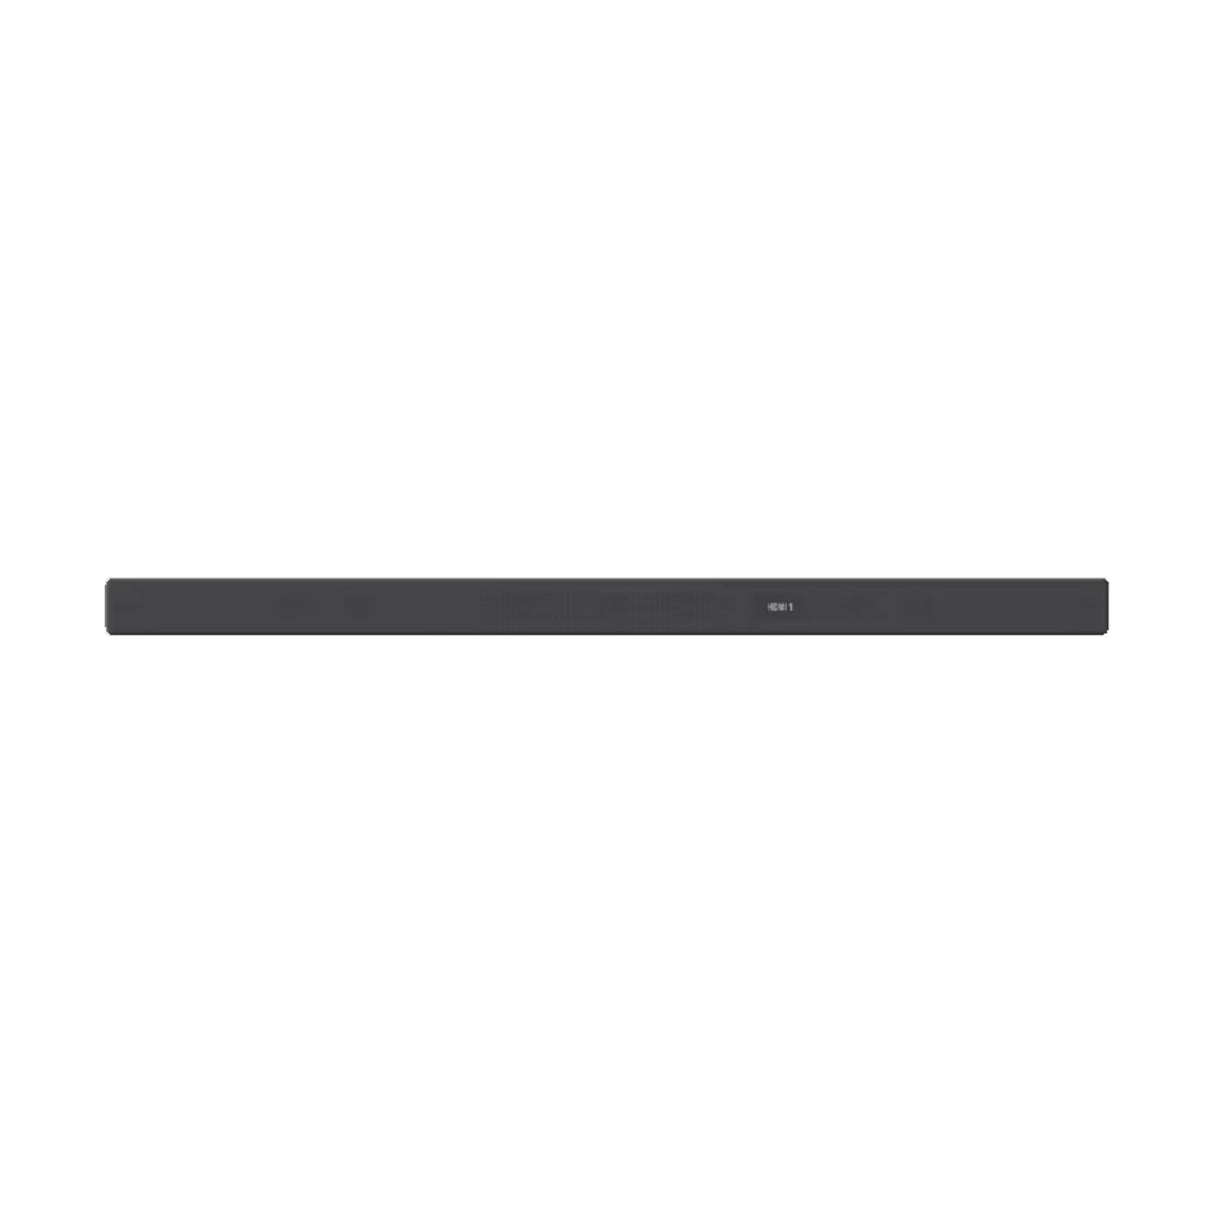 Sony HT-A7000 - 7.1.2/9.1 Channel Dolby Atmos Soundbar with 360 Spatial sound & Wireless subwoofer SA-SW3 and Rear Speaker SA-RS3S - 5.1 Package